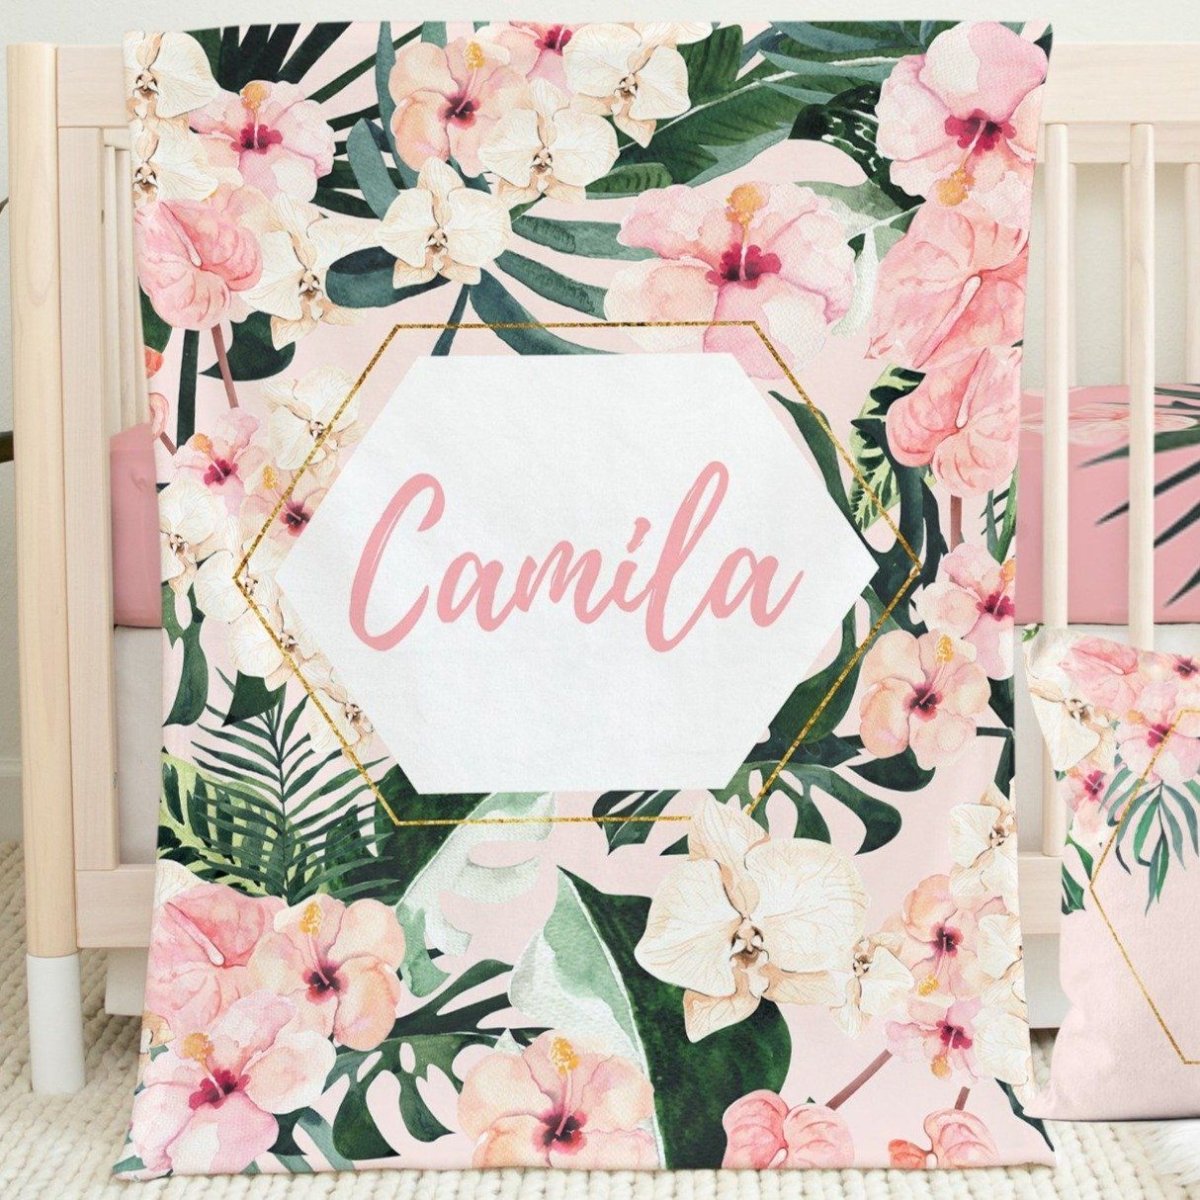 Tropical Floral Crib Bedding - gender_girl, text, Theme_Floral